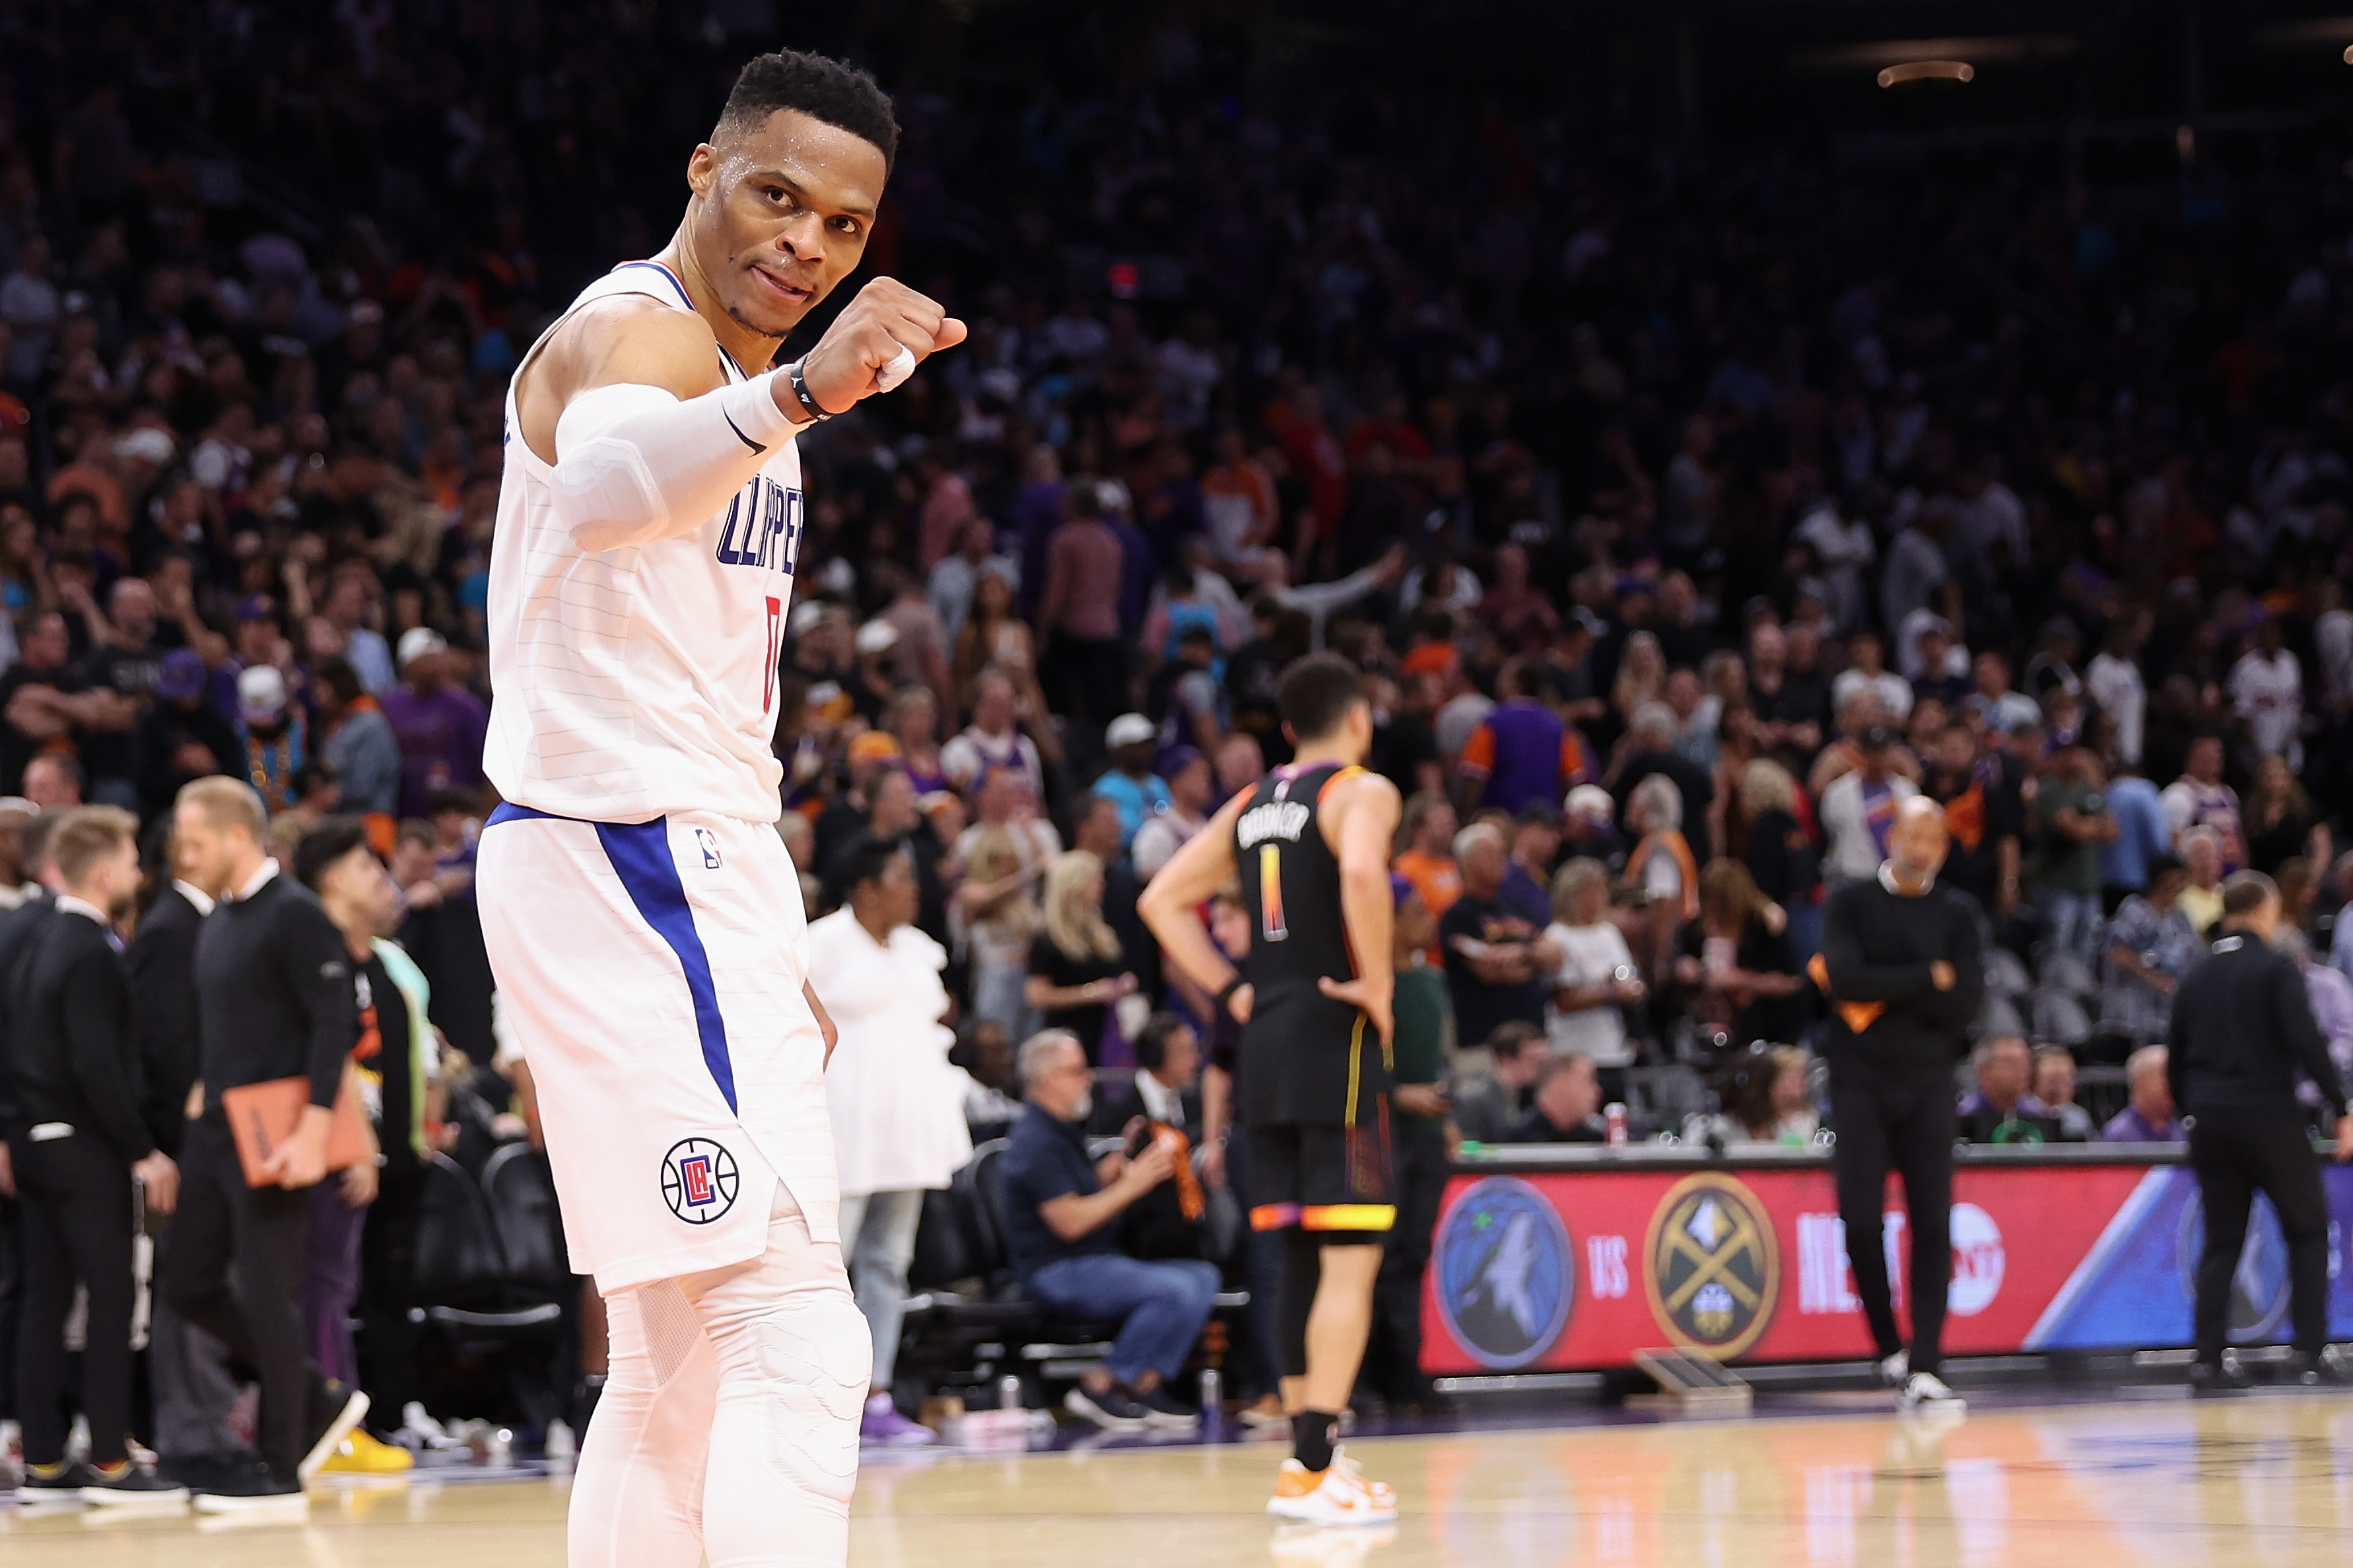 Russell Westbrook of the LA Clippers celebrates.